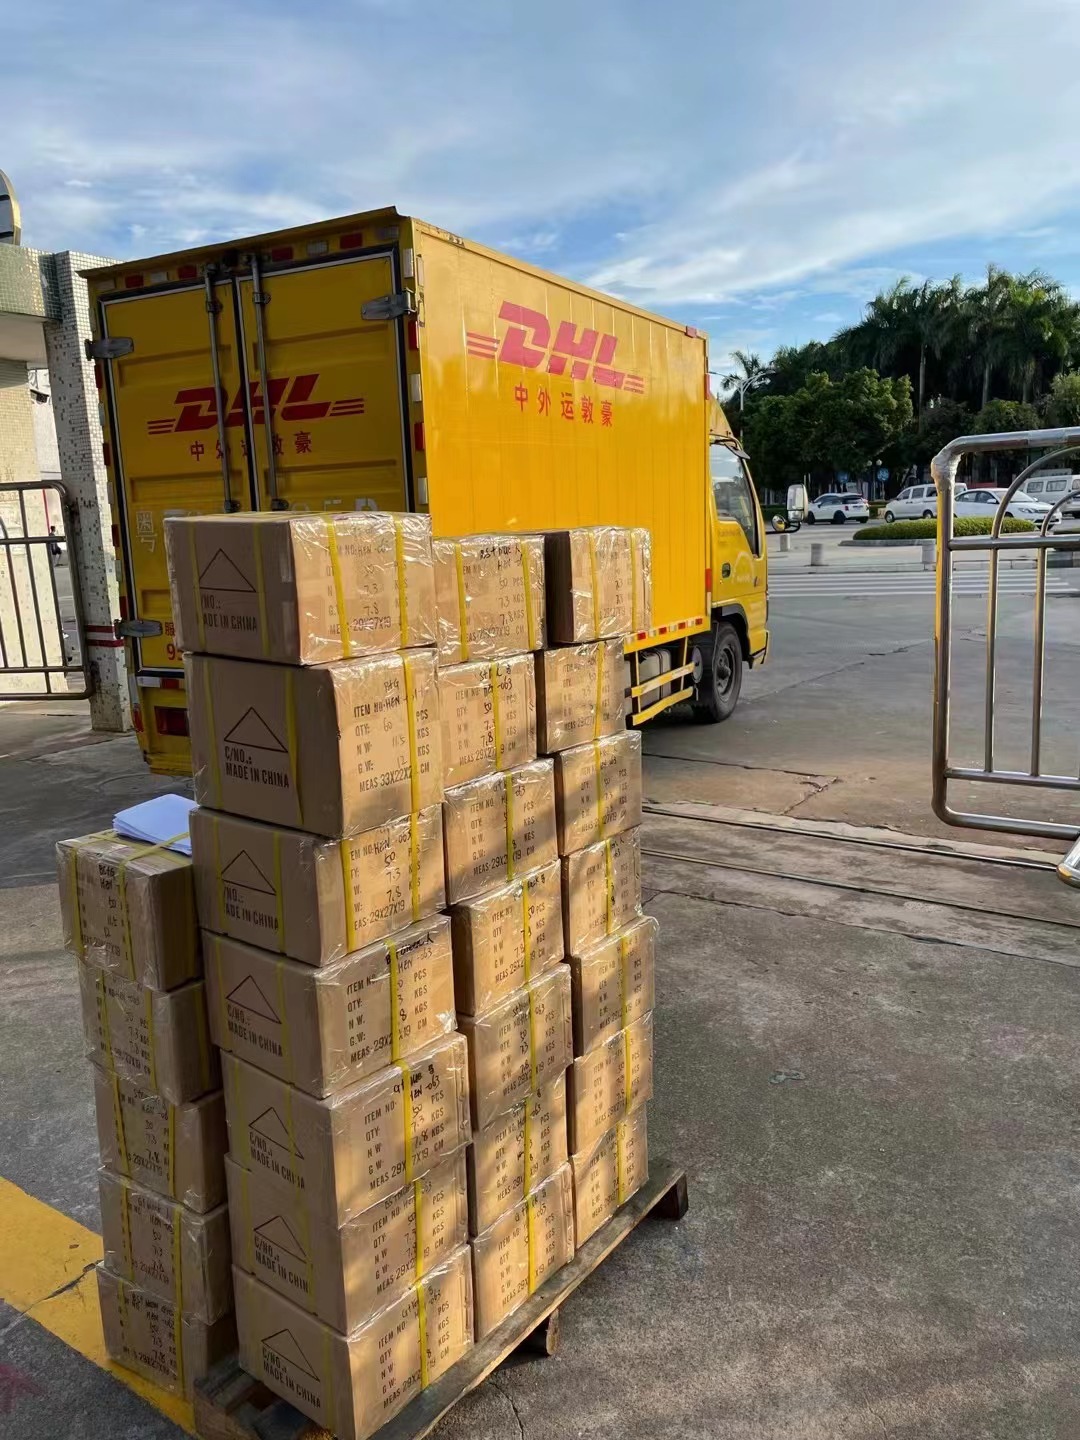 The DHL carries the products, Fast and Reassuring.